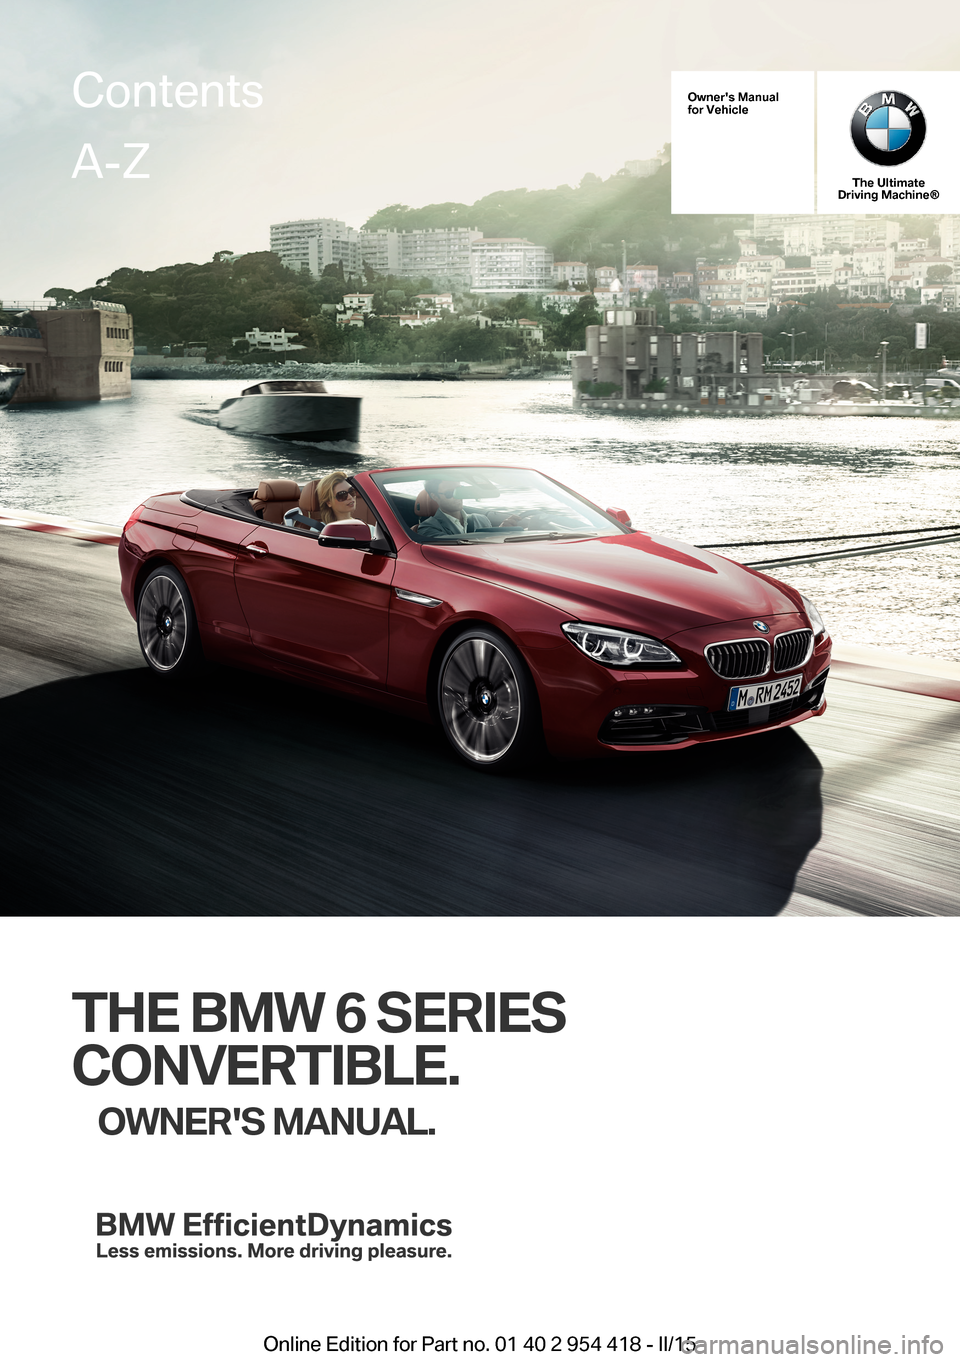 BMW 6 SERIES CONVERTIBLE 2016 F12 Owners Manual Owners Manualfor Vehicle
The UltimateDriving Machine®
THE BMW 6 SERIES
CONVERTIBLE.
OWNERS MANUAL.
ContentsA-Z
Online Edition for Part no. 01 40 2 954 418 - II/15   